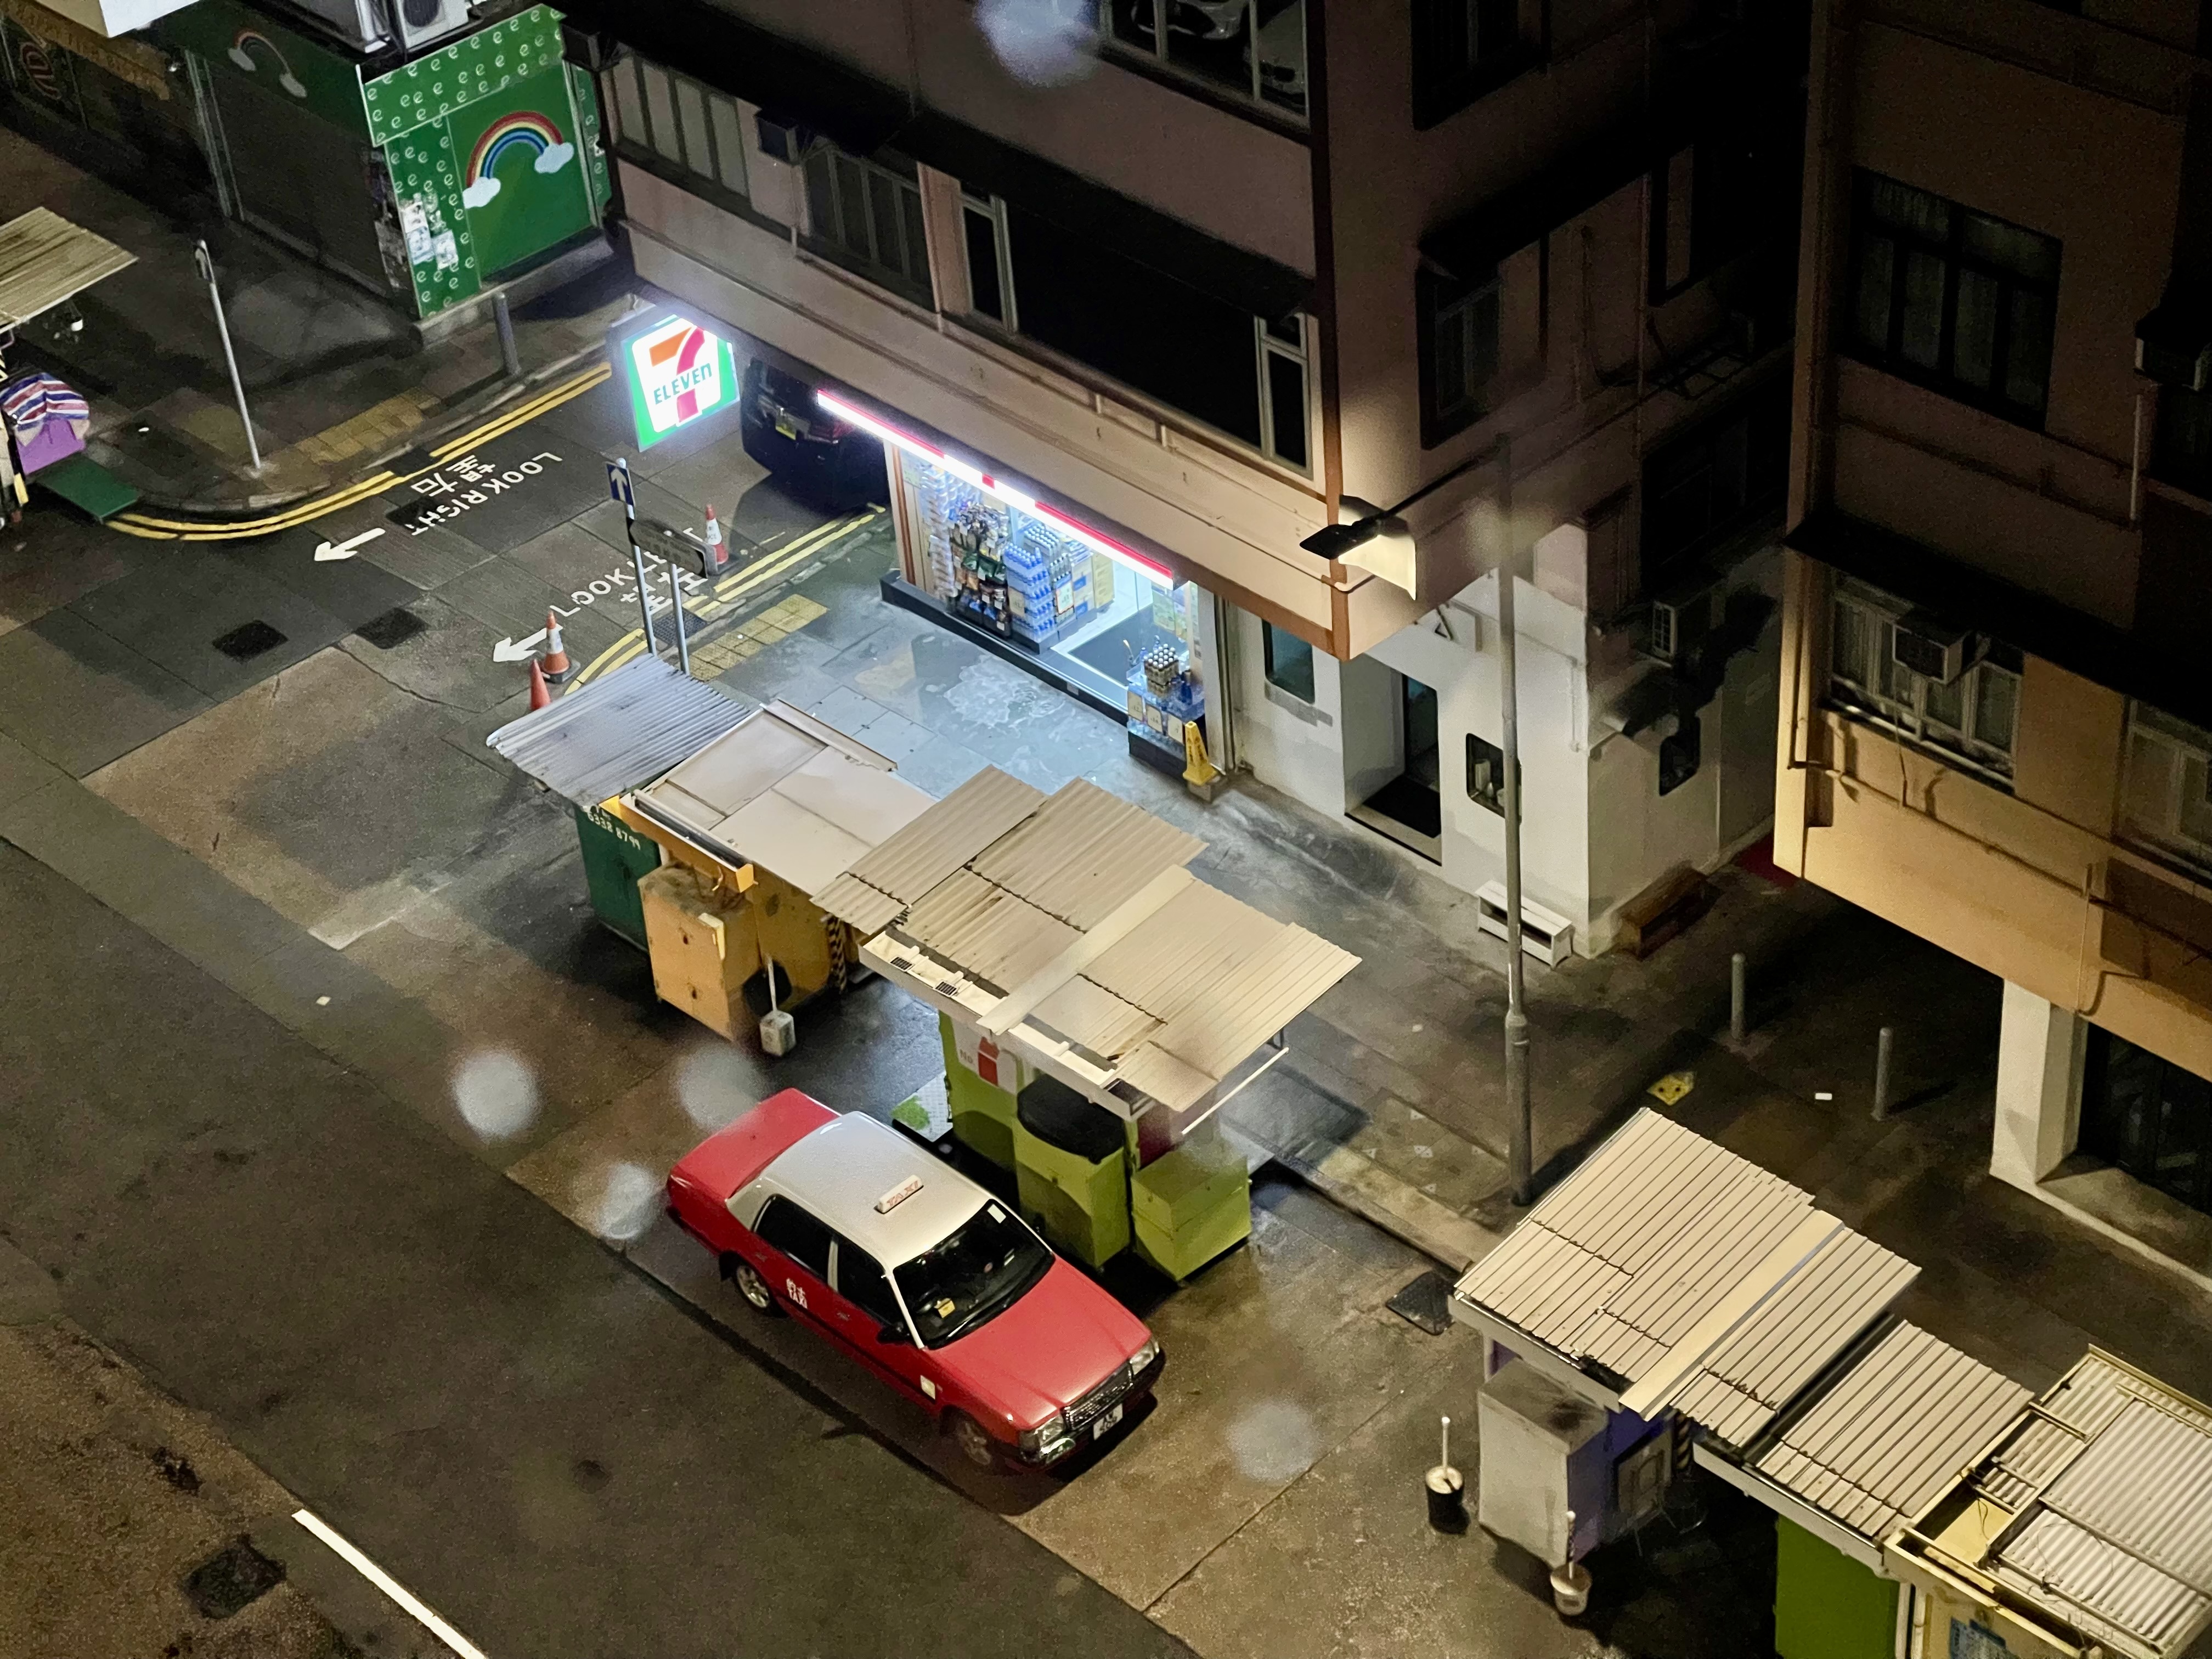 The 7-Eleven steps, benches, and a parked taxi in the rain